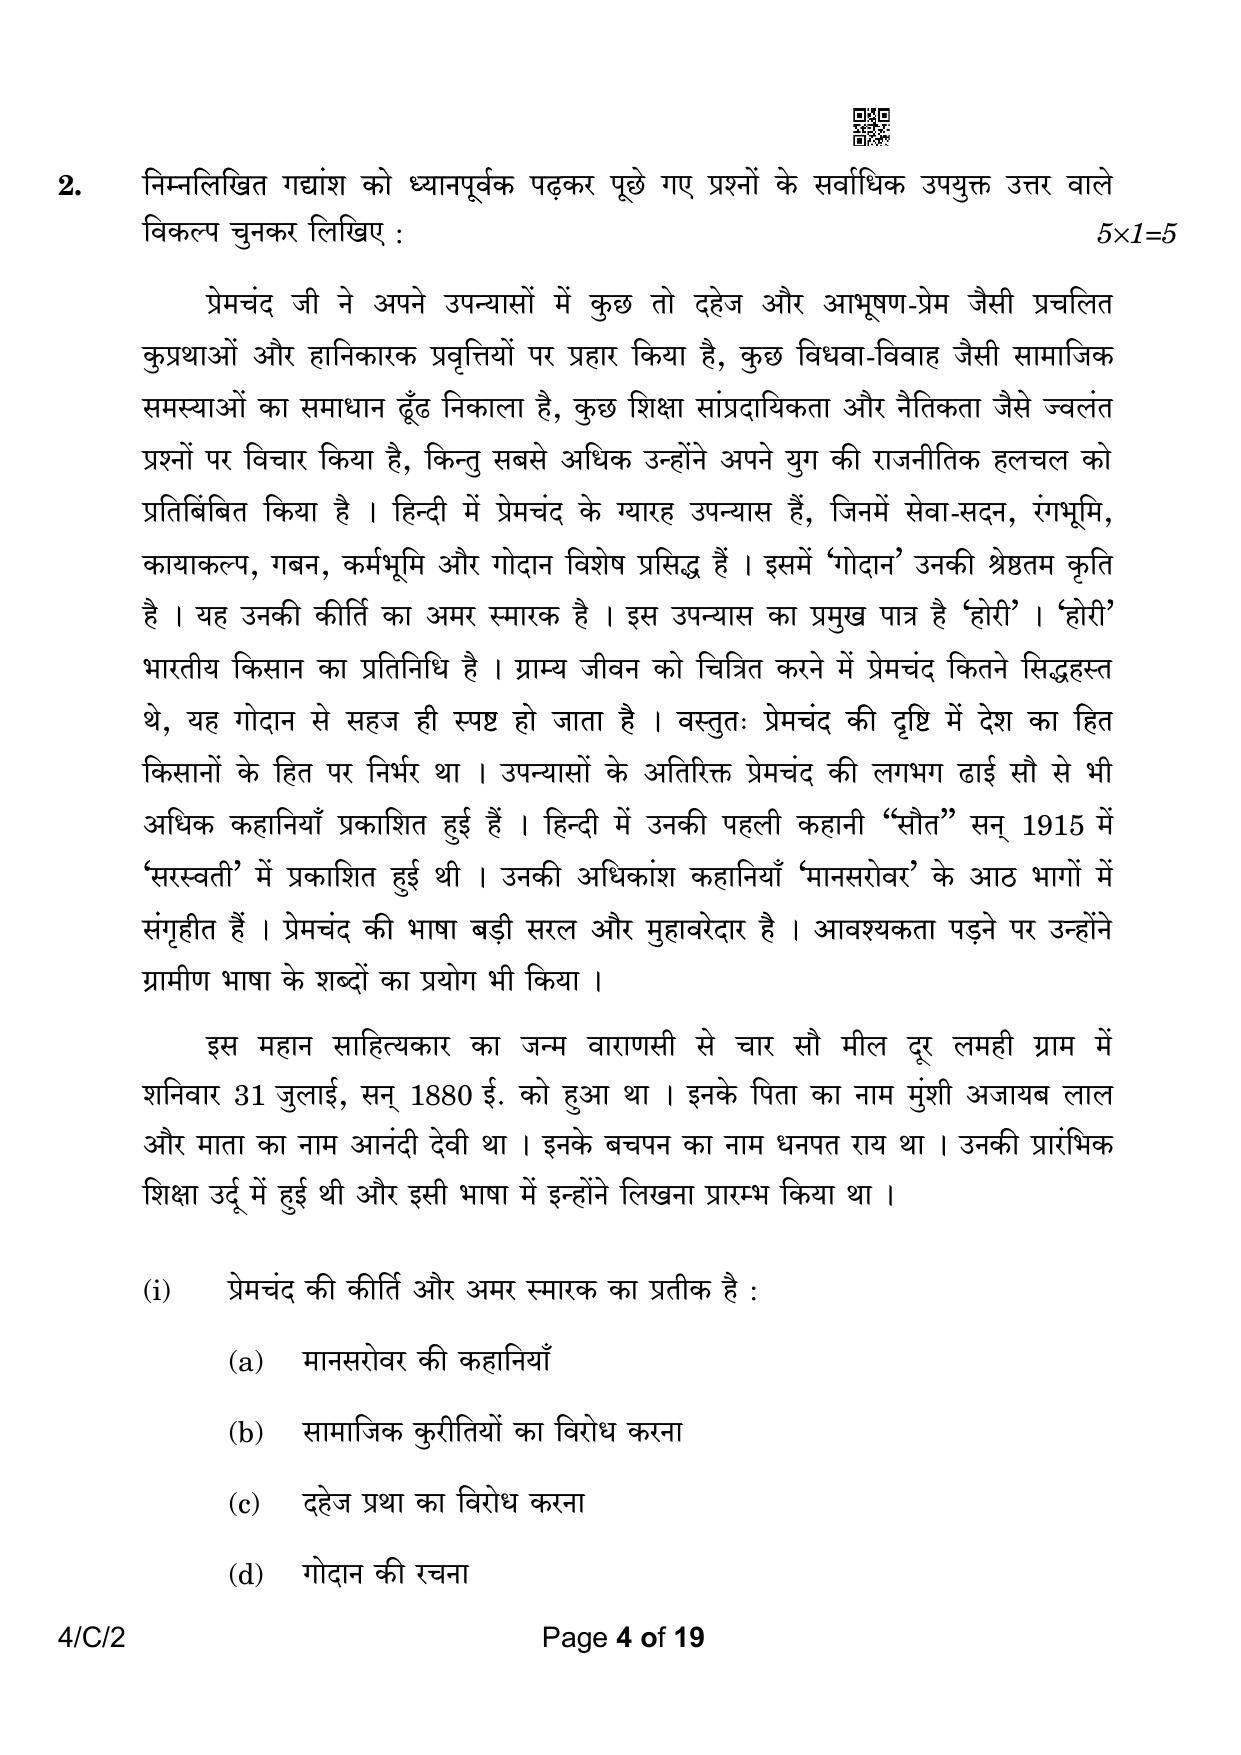 CBSE Class 10 4-2 Hindi B 2023 (Compartment) Question Paper - Page 4